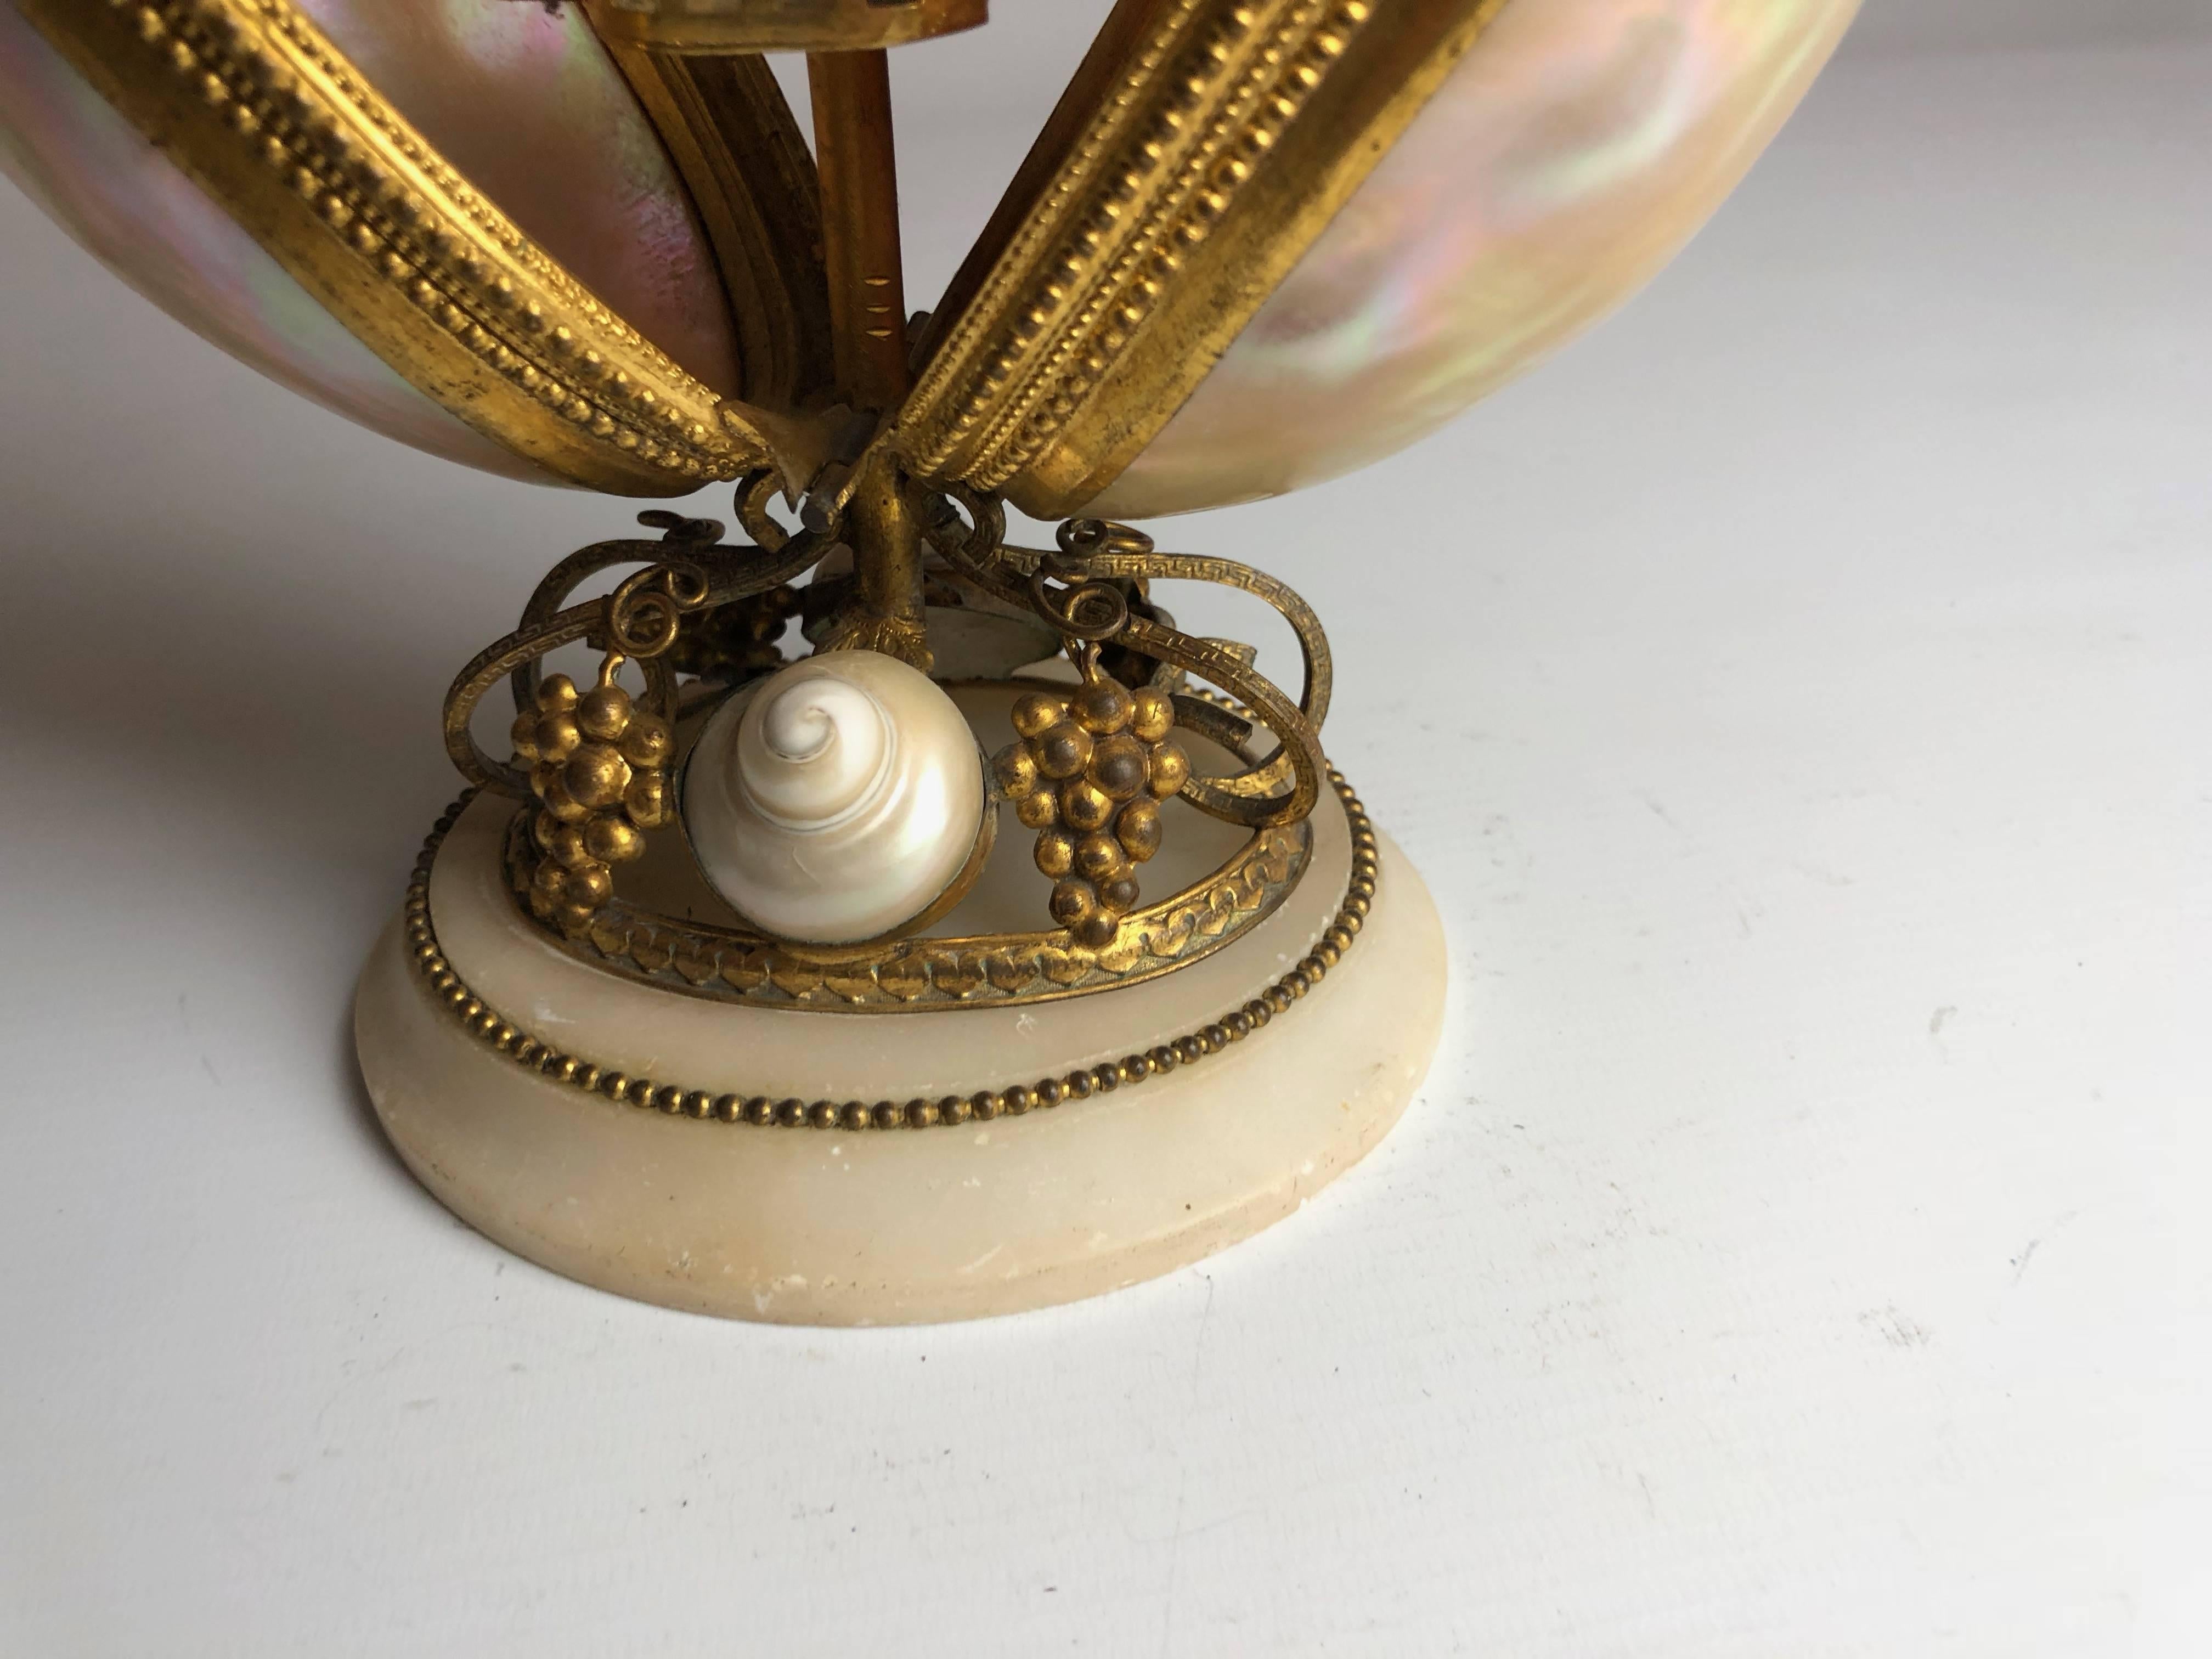 Grand Tour 19th Century French Mechanical Perfume or Scent Caddy, Mother-of-Pearl Shells